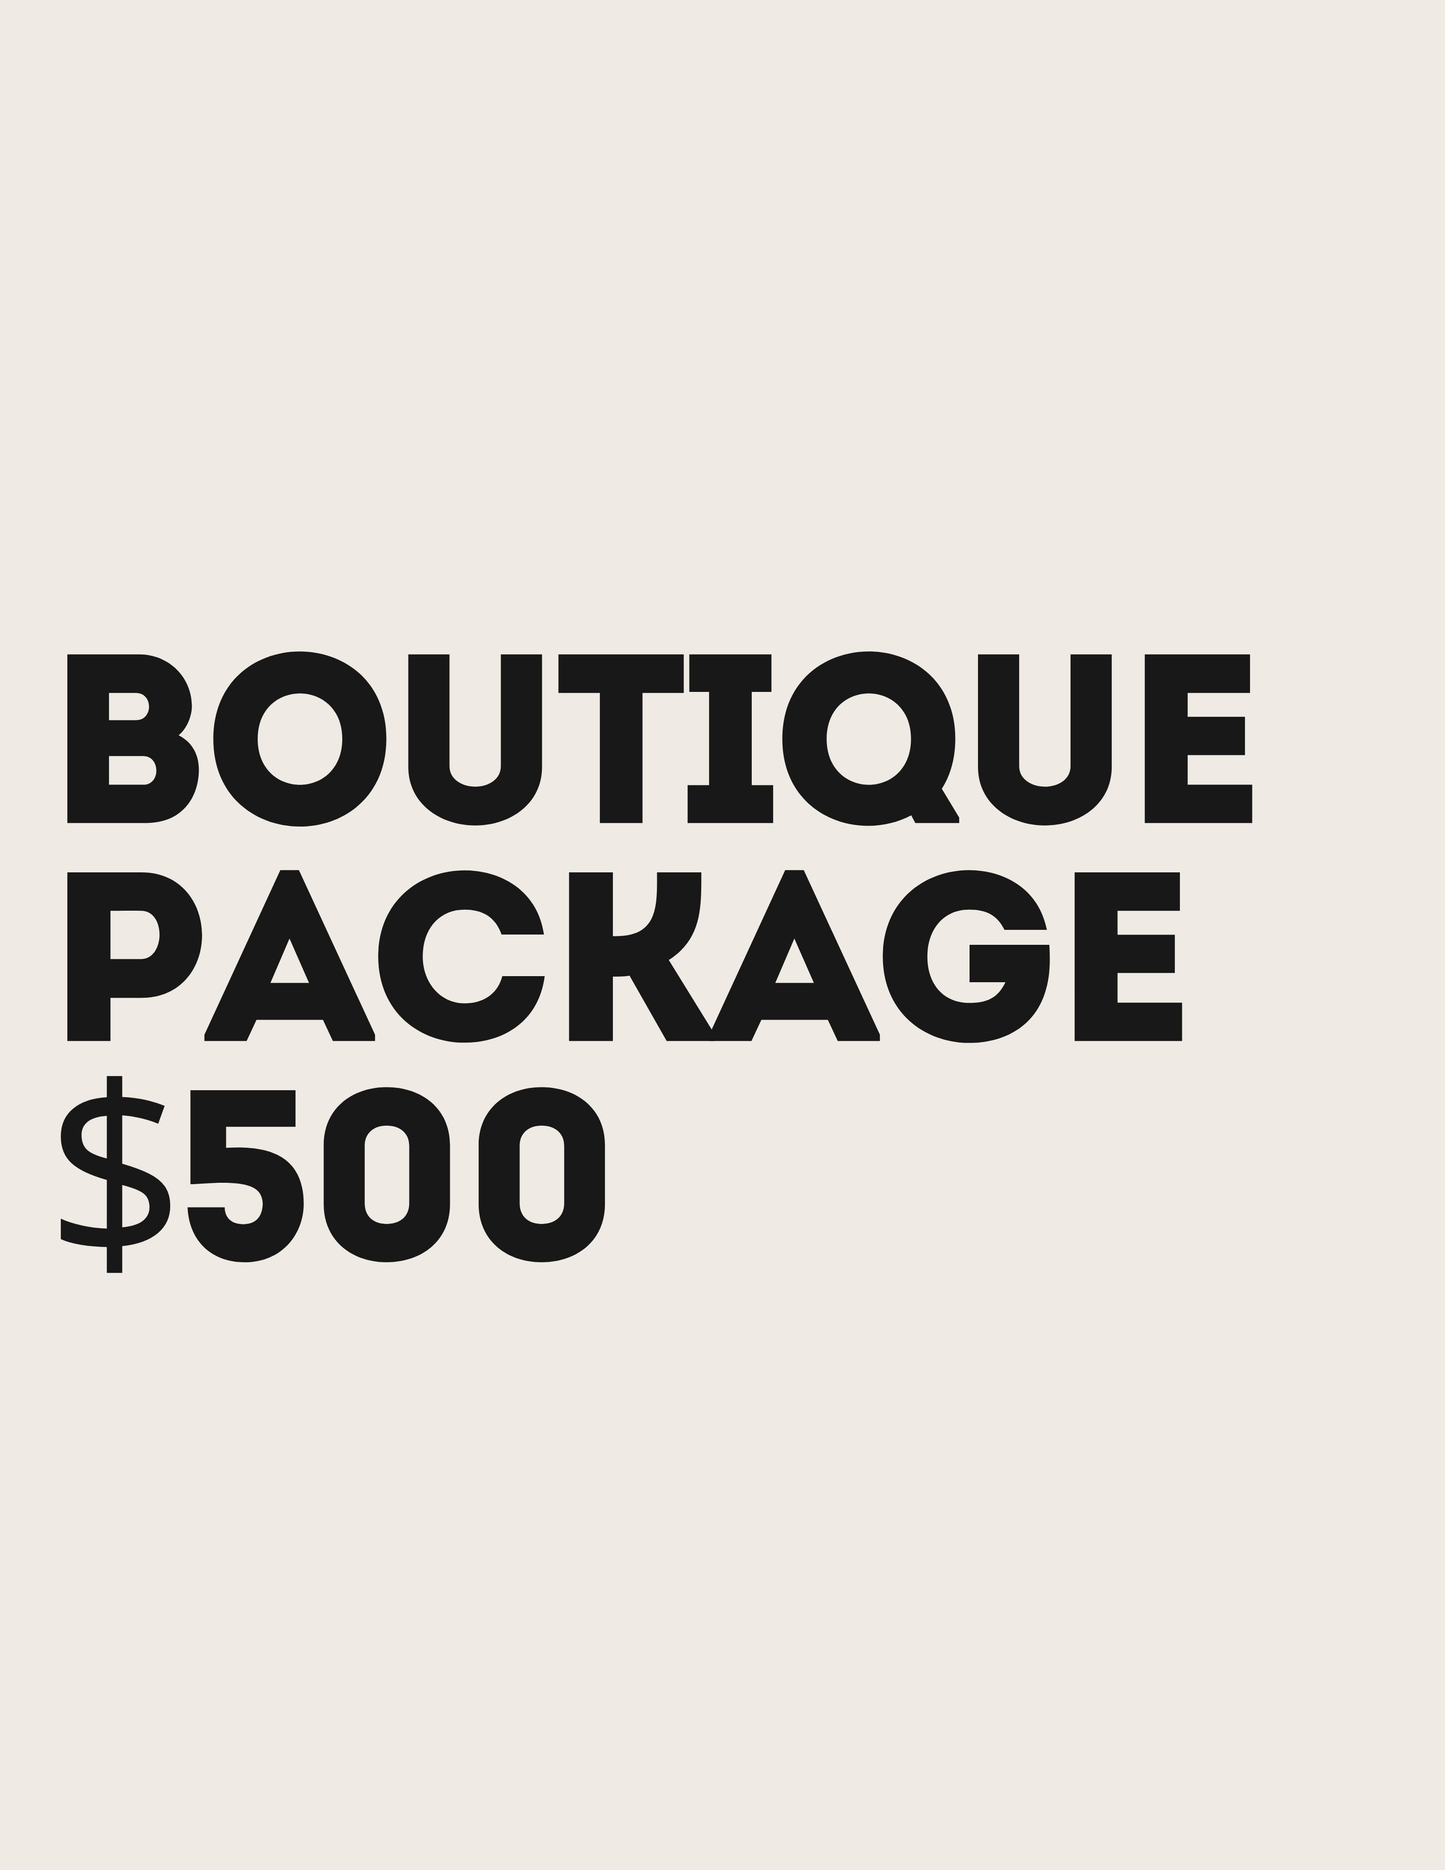 $500 Boutique Package - Everything you need to start your online boutique!